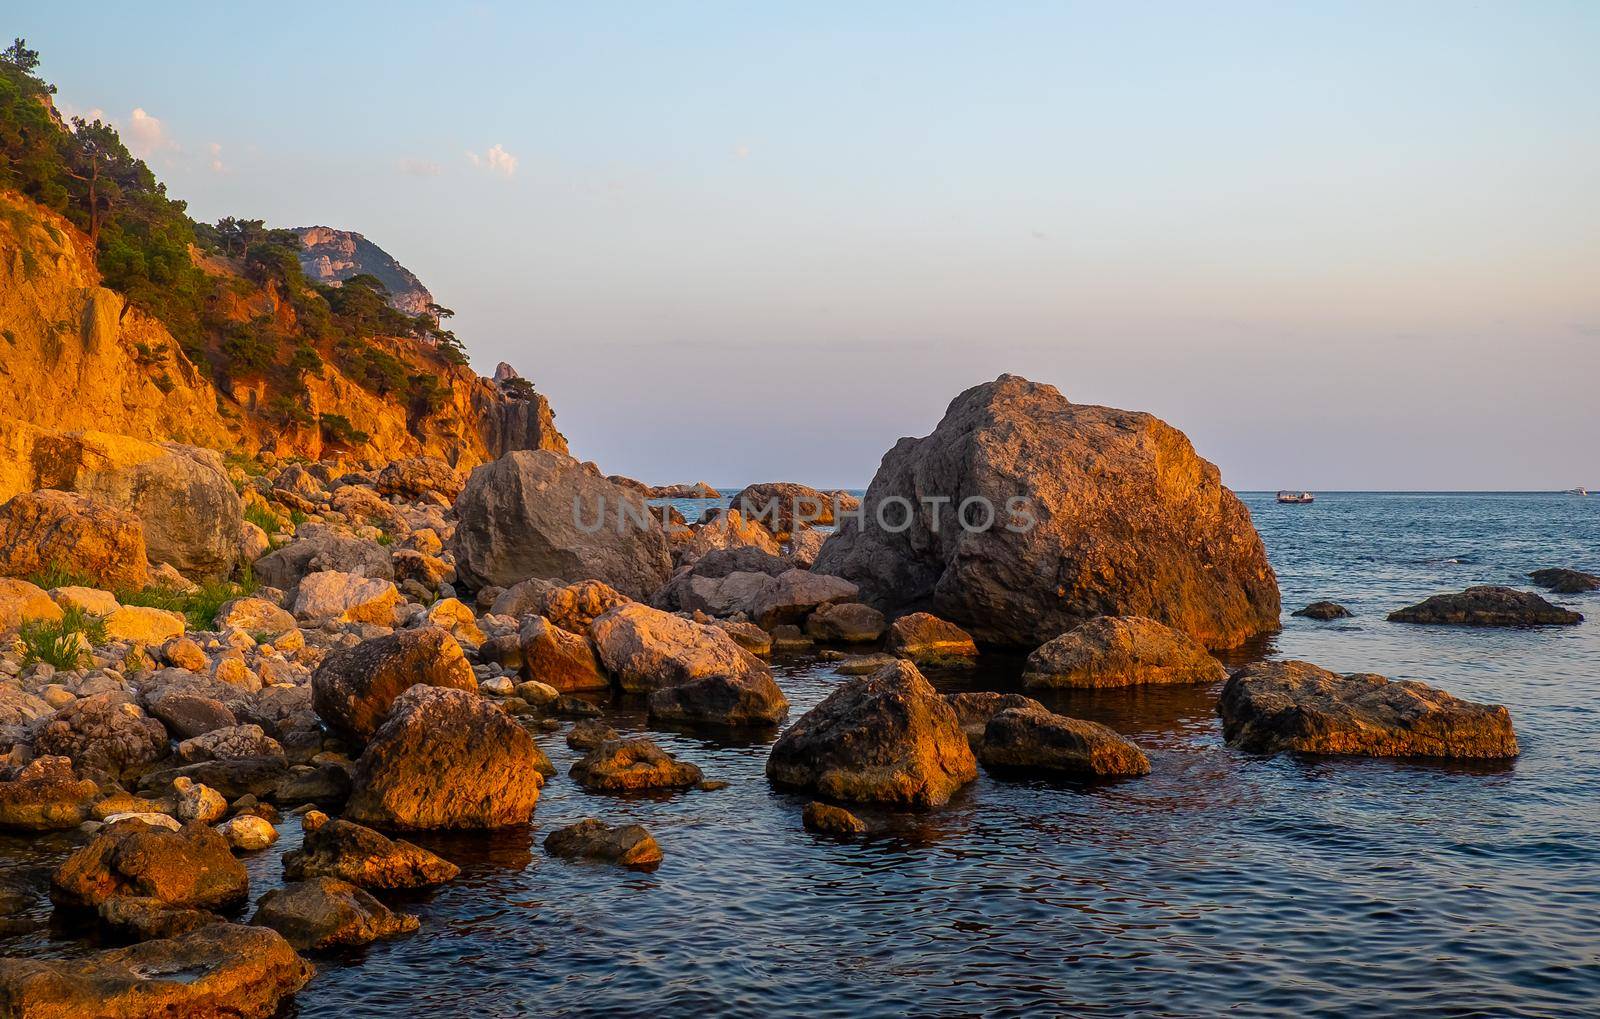 Huge boulders on the shores of a small bay of the Black Sea.